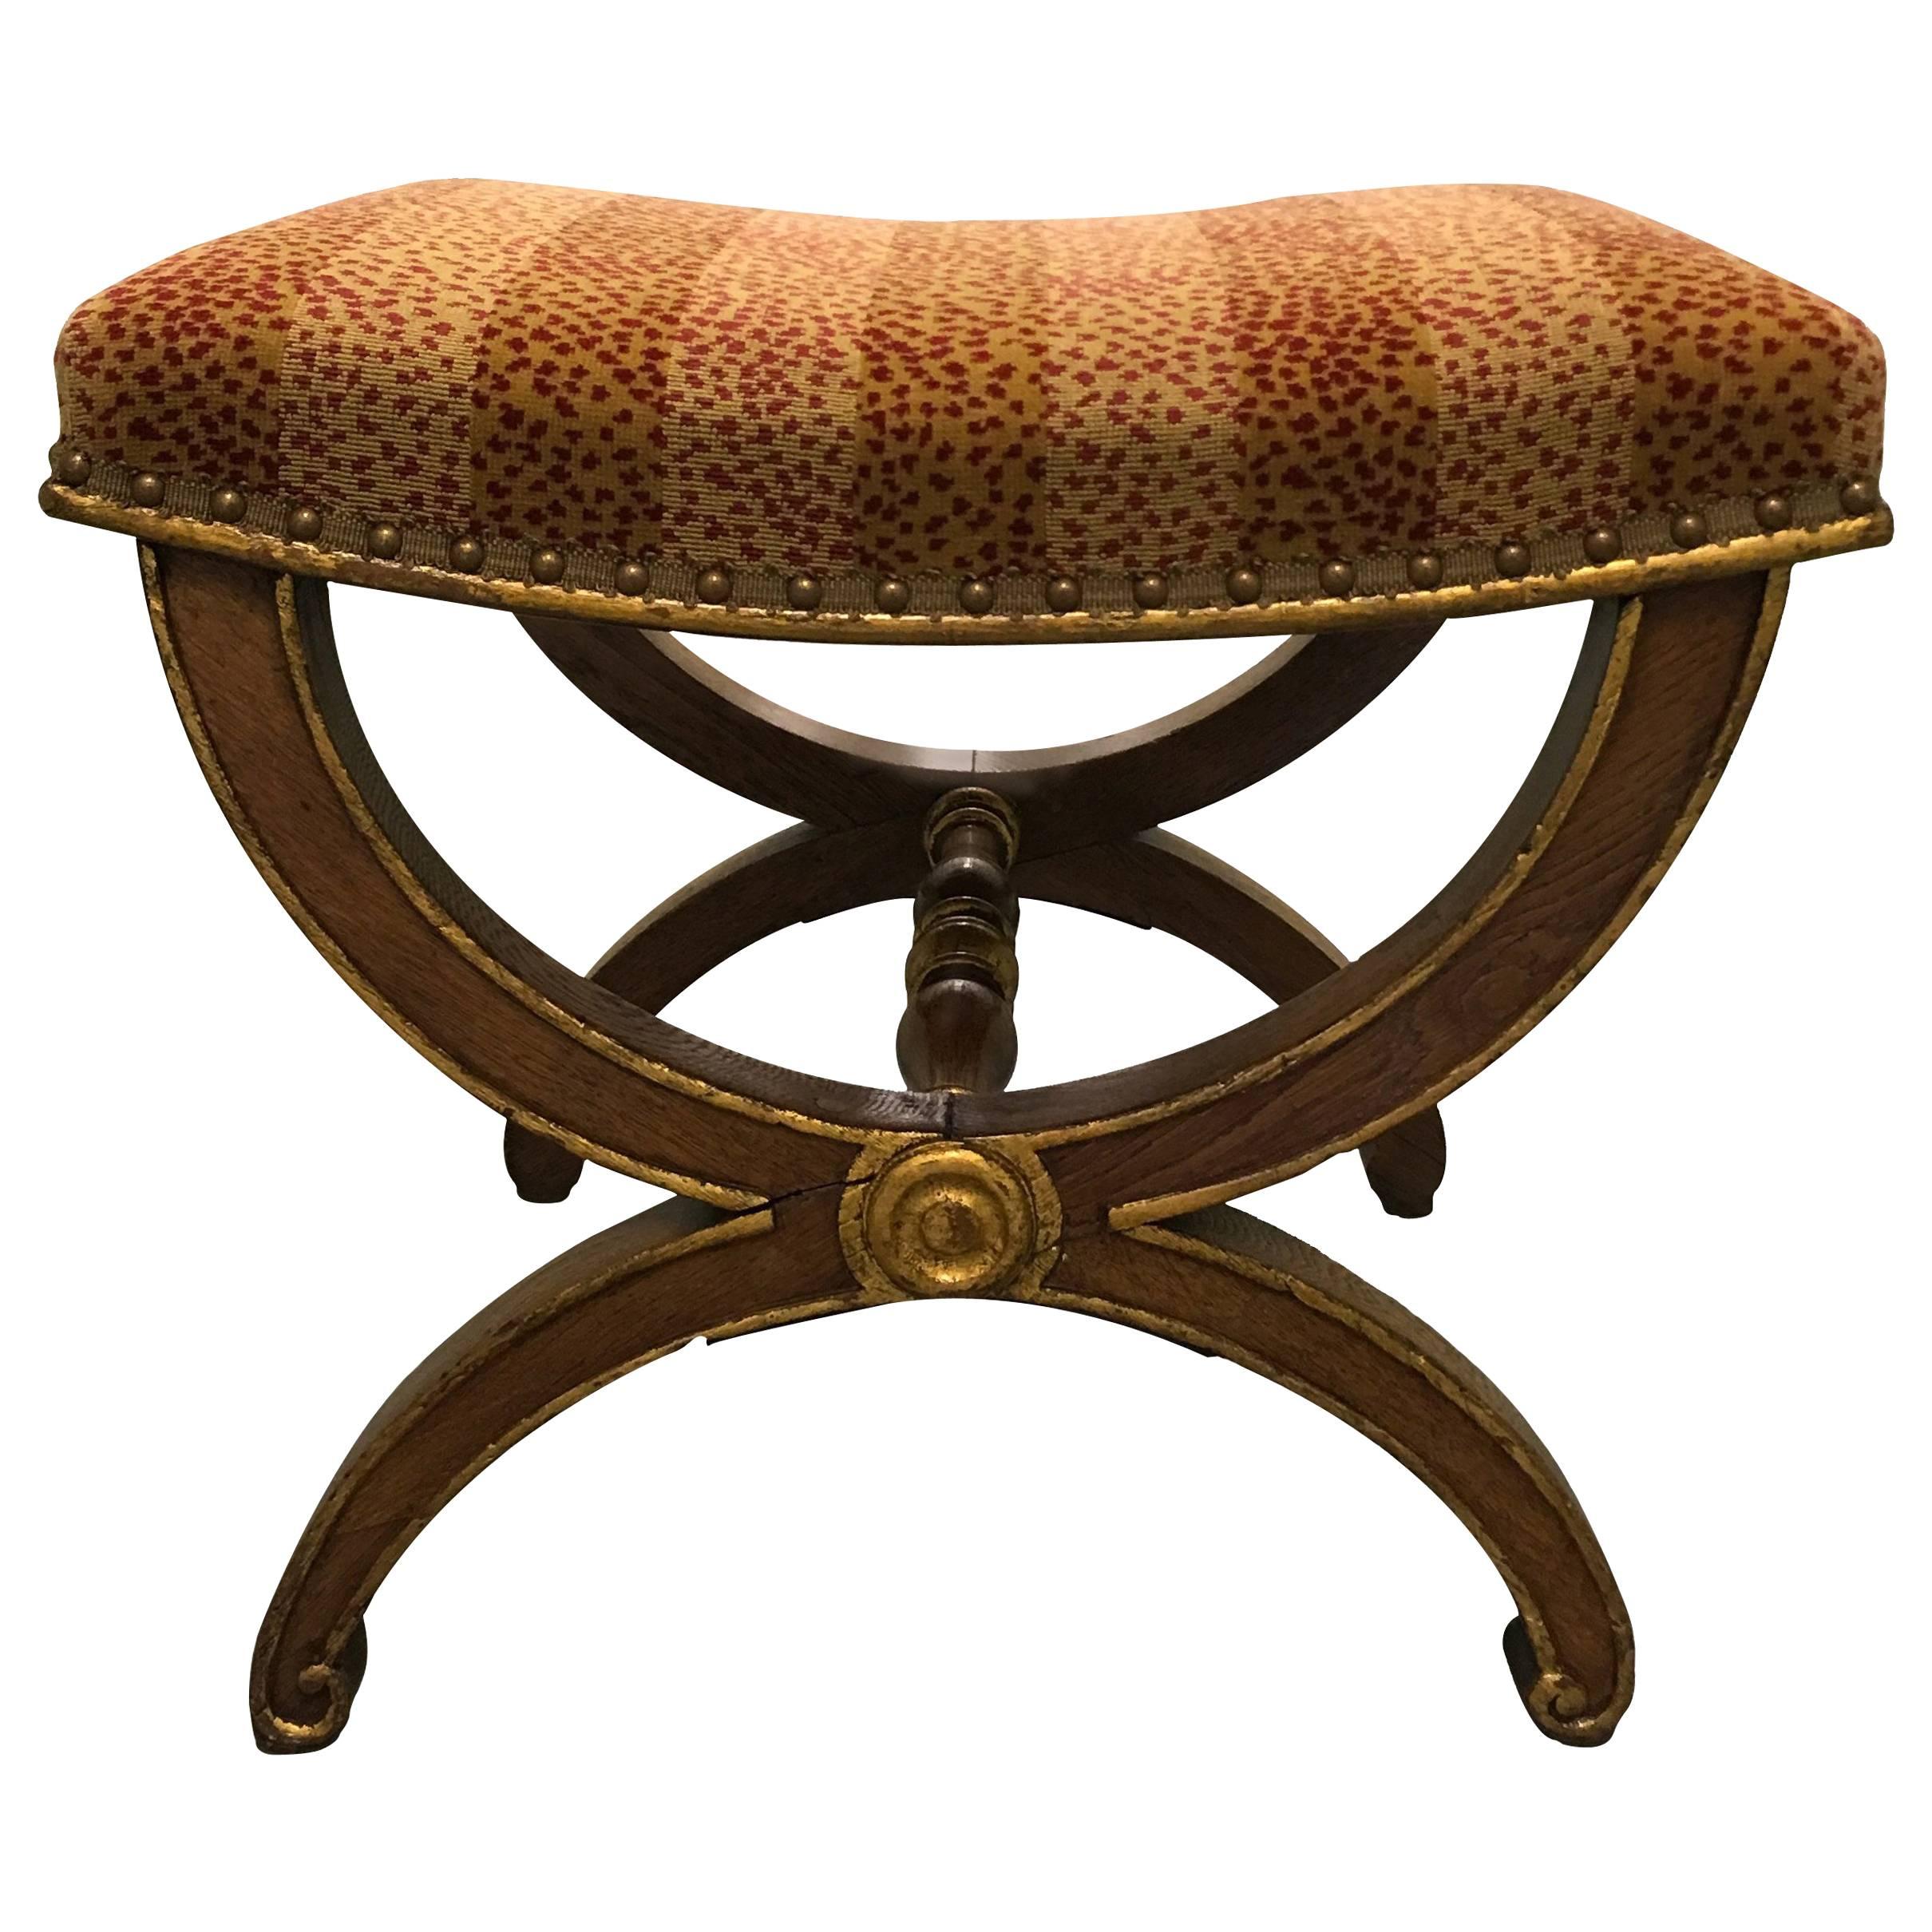 English Fruitwood and Gilt Curule Bench